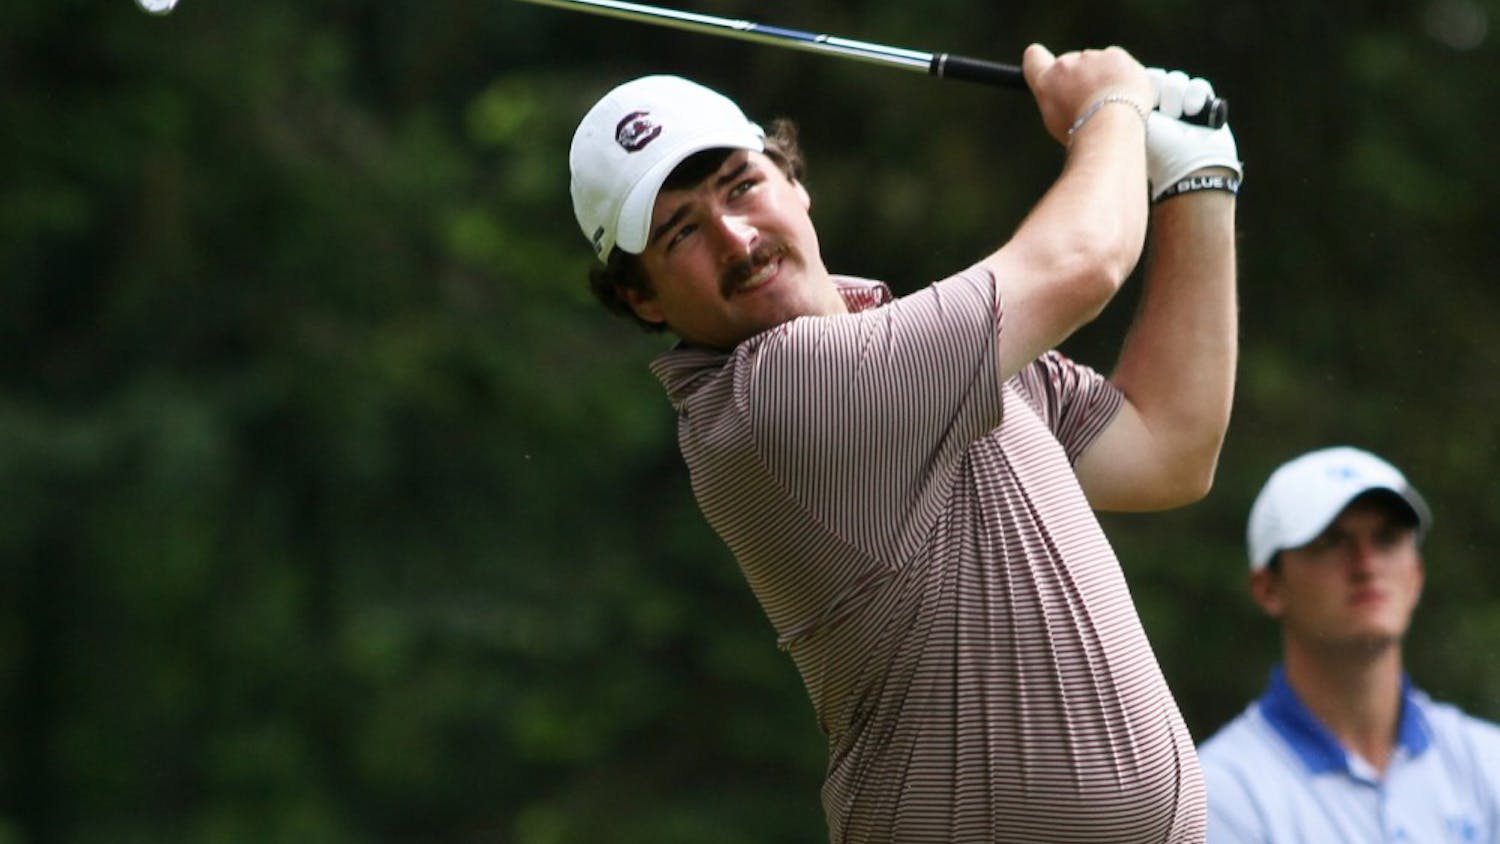 Sean Kelly finished his South Carolina career by placing tied for 40th.&nbsp;